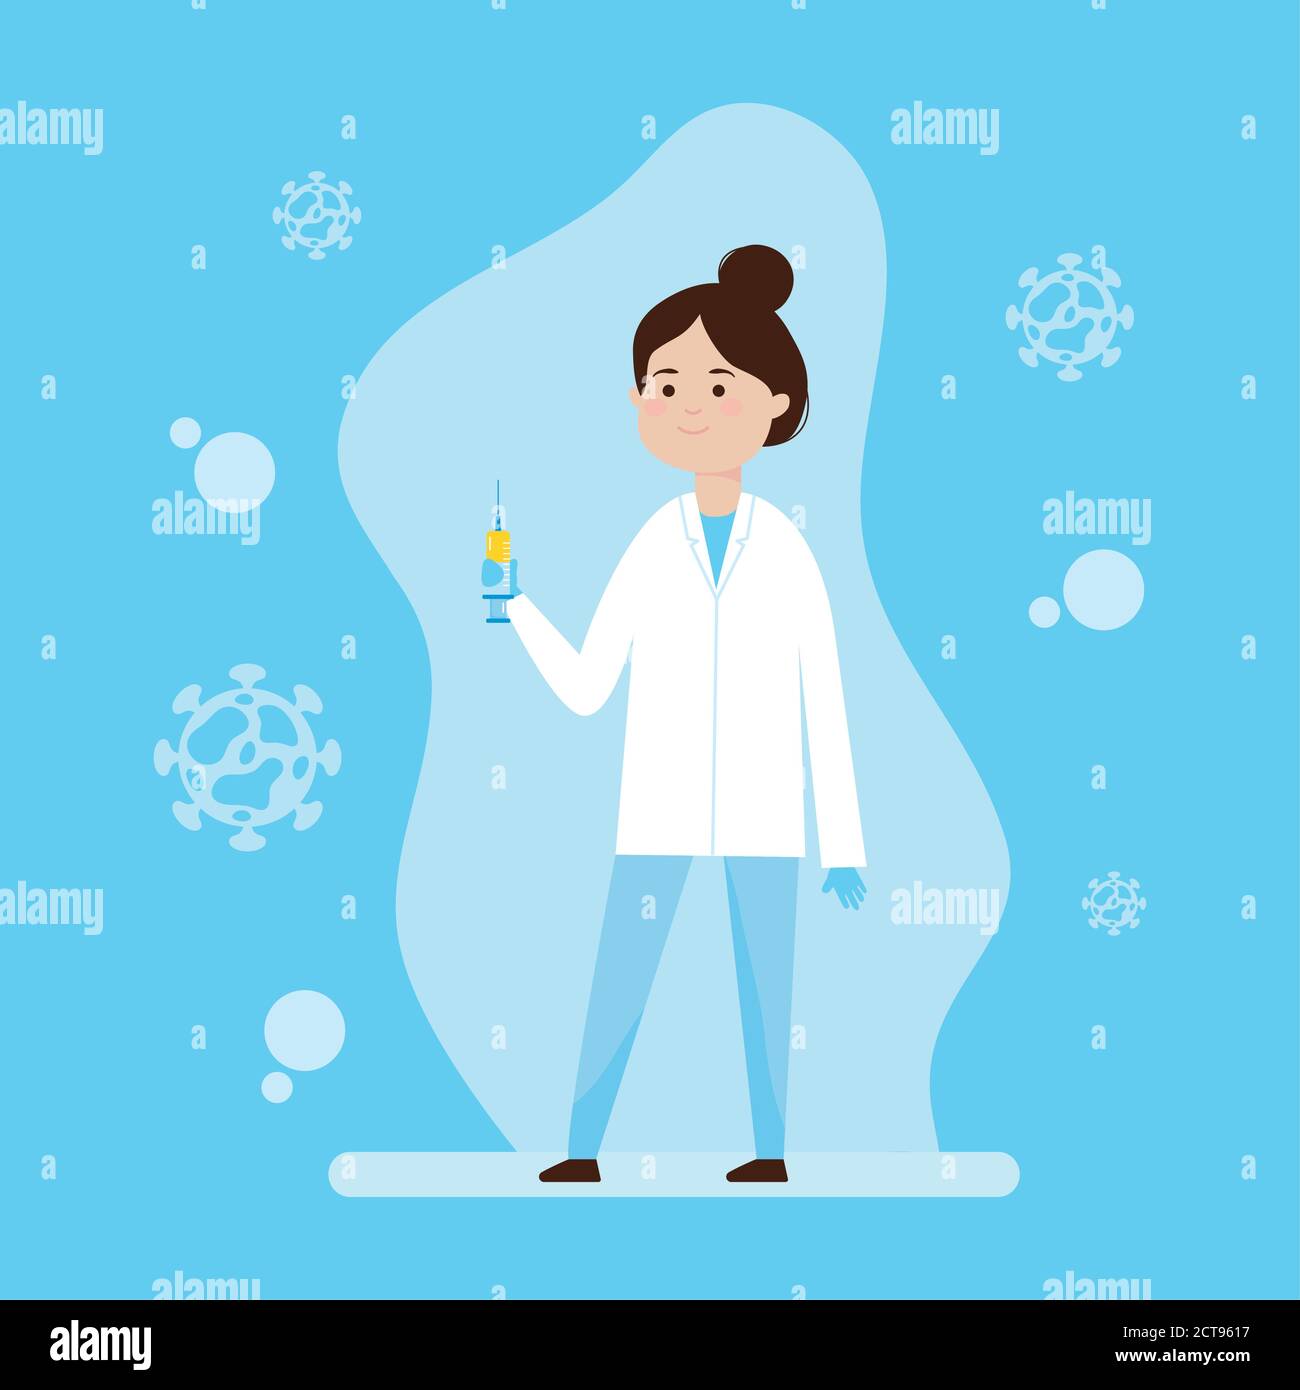 Vaccine research design, cartoon woman doctor holding a vaccine syringe  icon over blue background, colorful design, vecotr illustration Stock  Vector Image & Art - Alamy